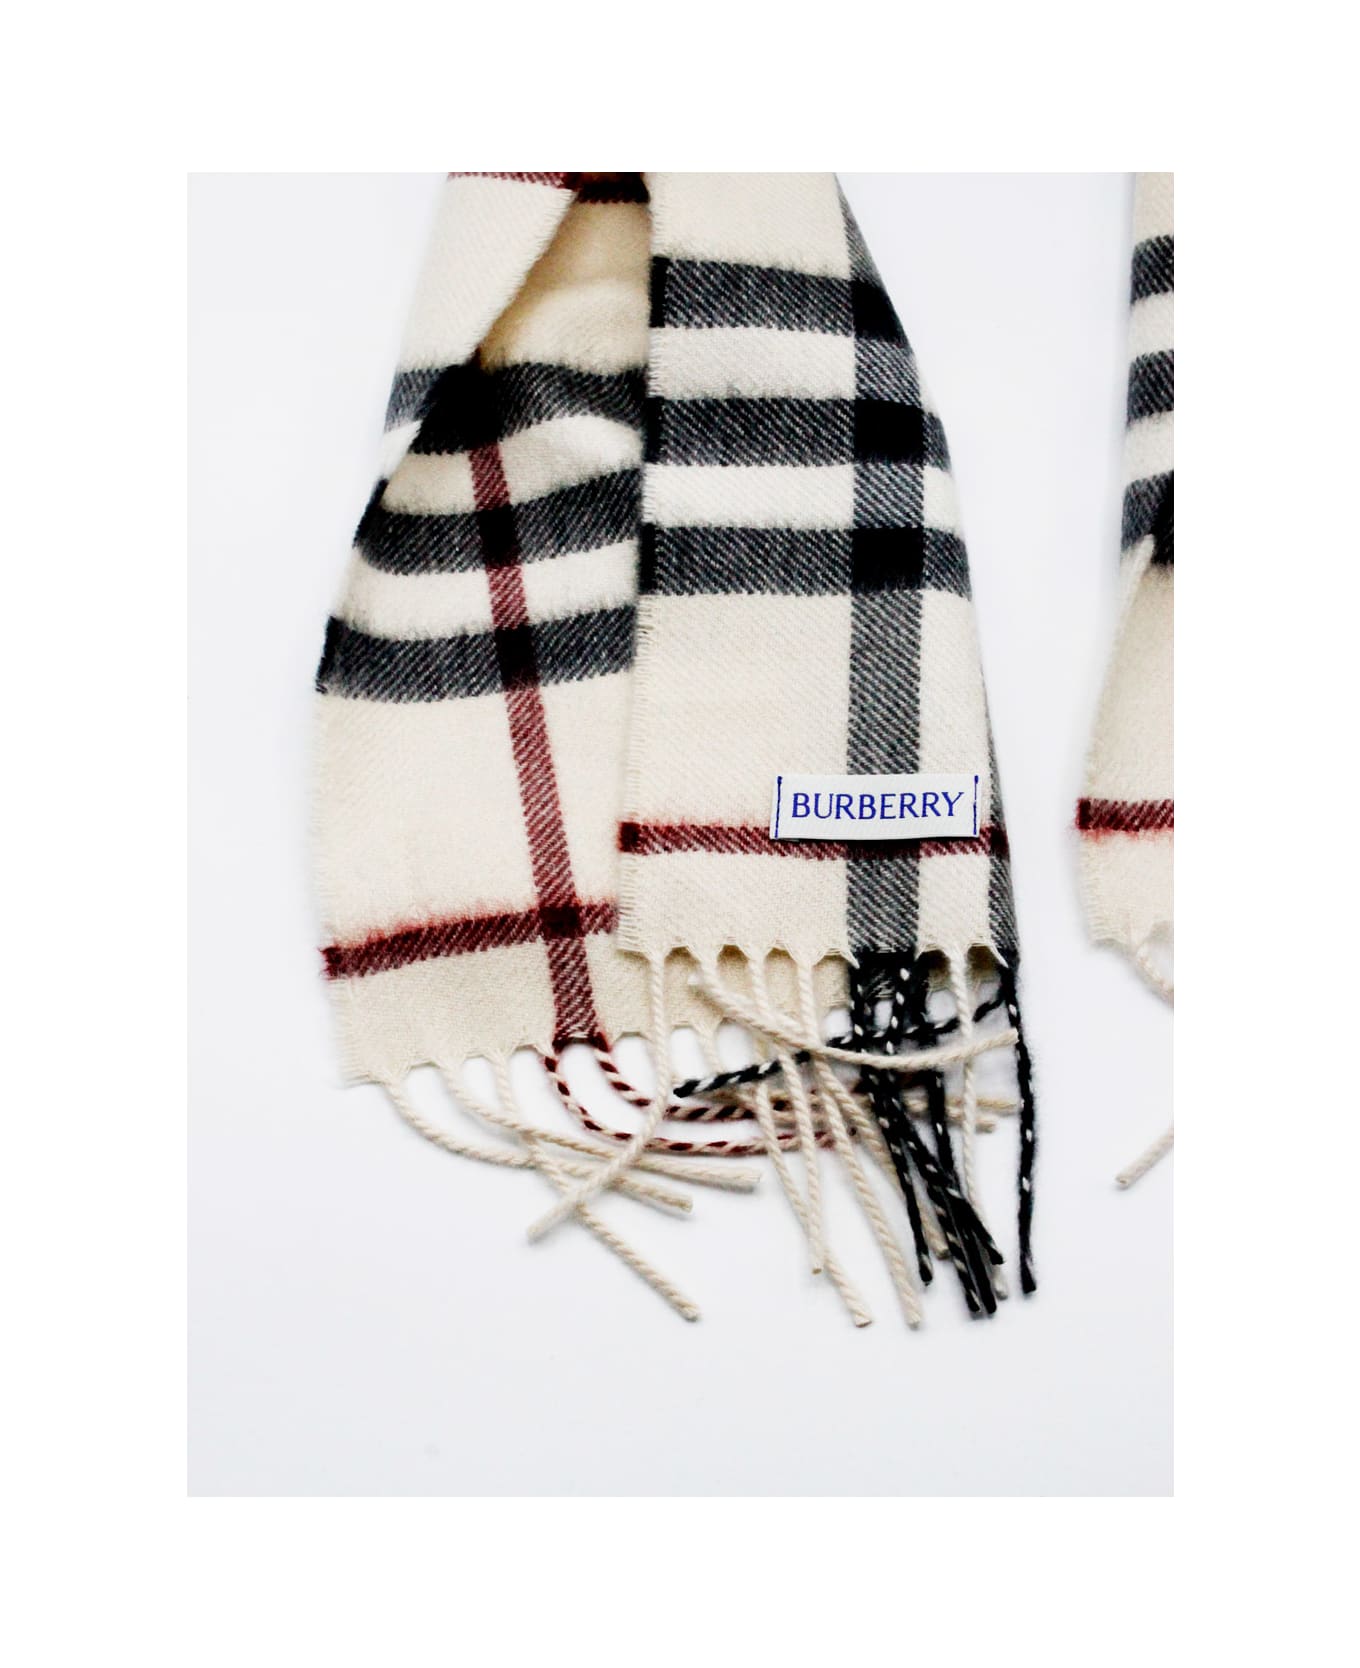 Burberry Scarf In Pure And Soft Cashmere With Check Pattern And Fringes At The Hem Measuring 130 X 20 - cream アクセサリー＆ギフト